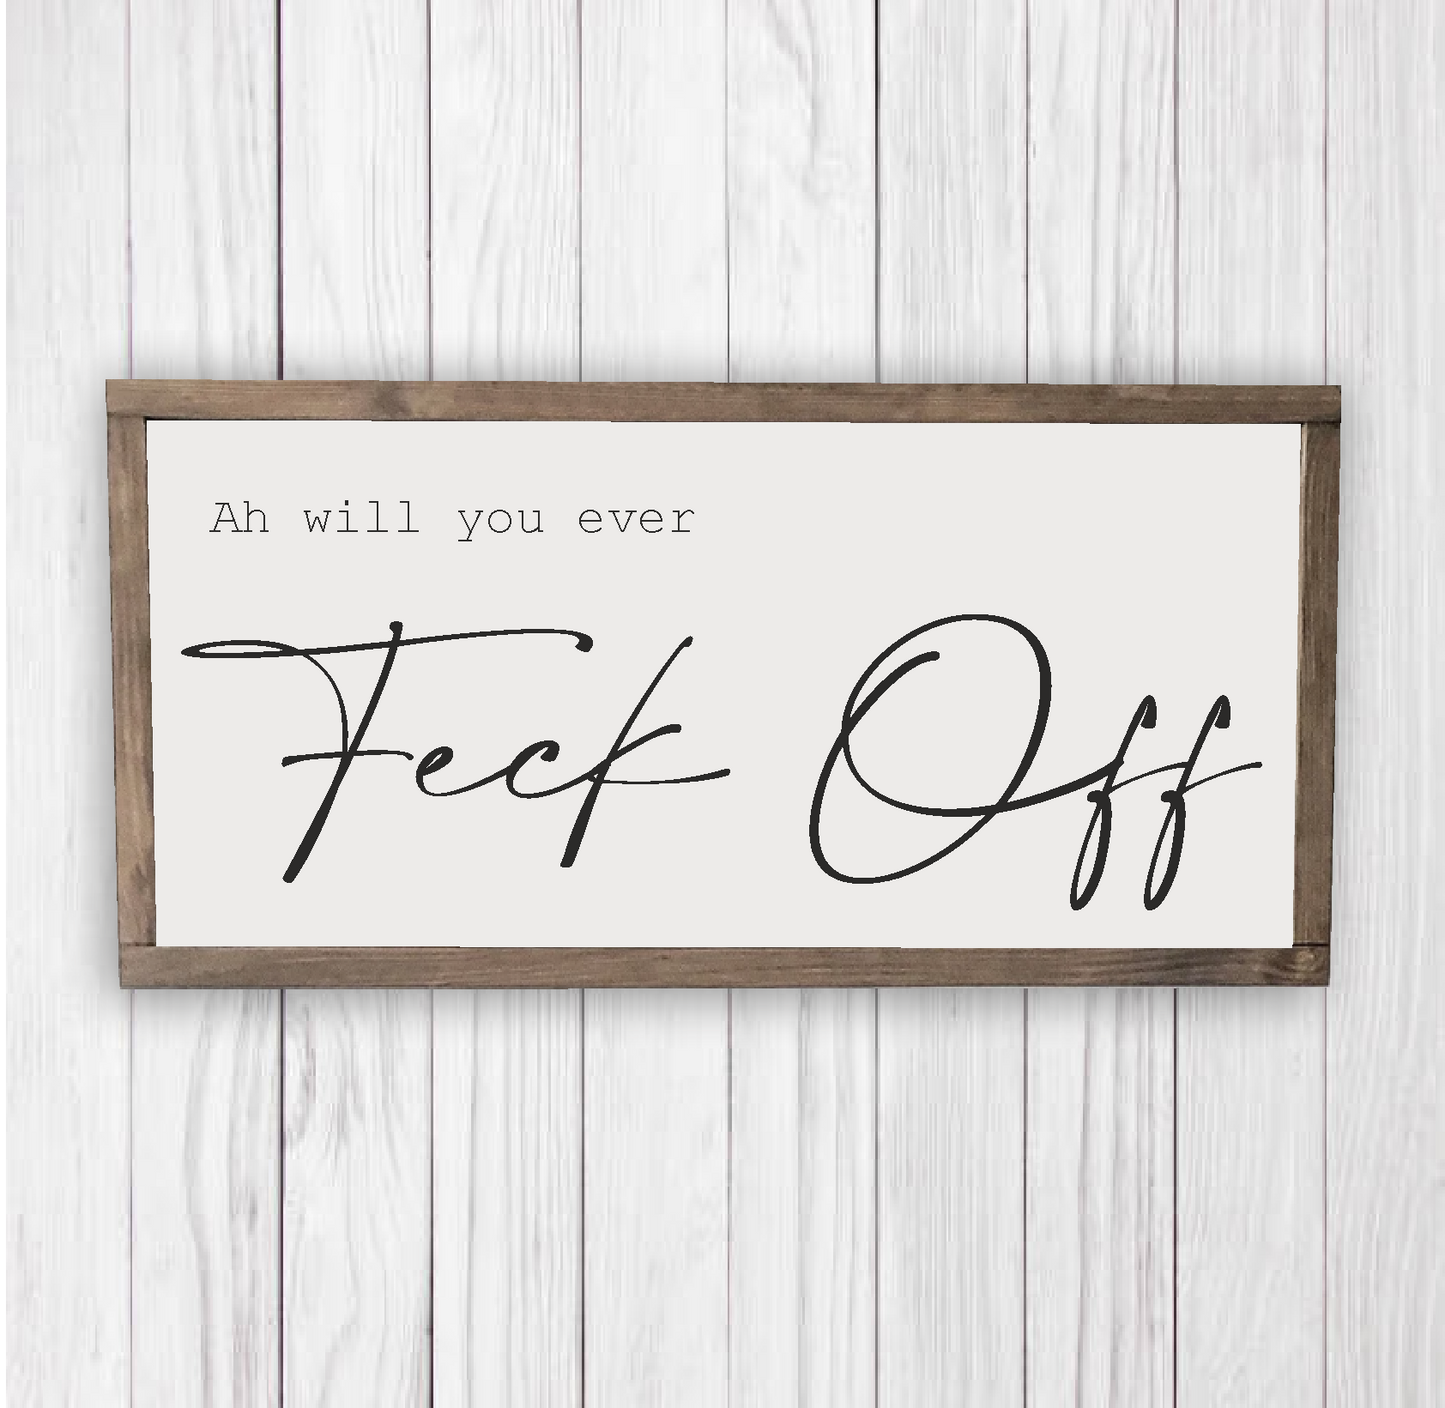 Ah will you ever feck off.. Irish home decor that will bring a smile to many a face. These handmade signs are produced in Finglas, Dublin and come in many different sizes. Ready to hang, simply order online. Ph: 085 2500151